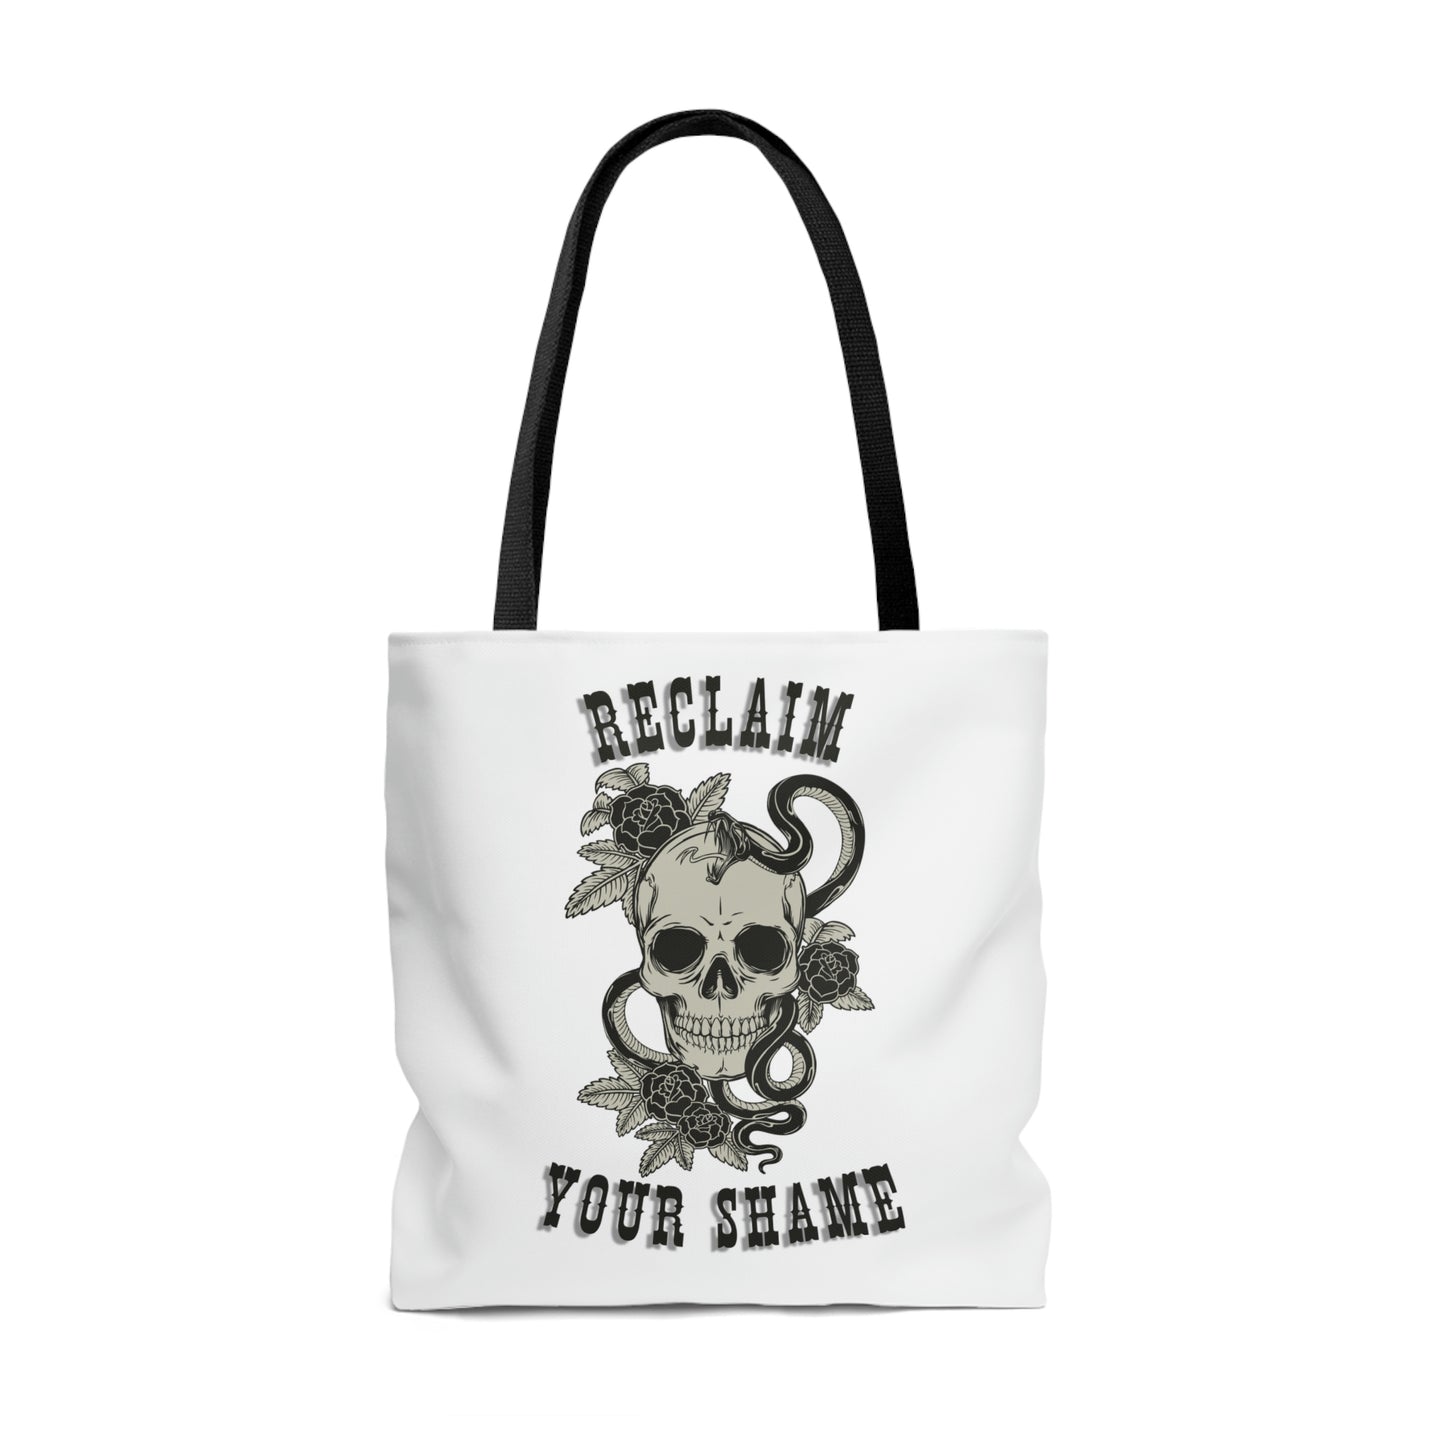 Reclaim Your Shame [Gauthism Line] Tote Bag in 3 sizes